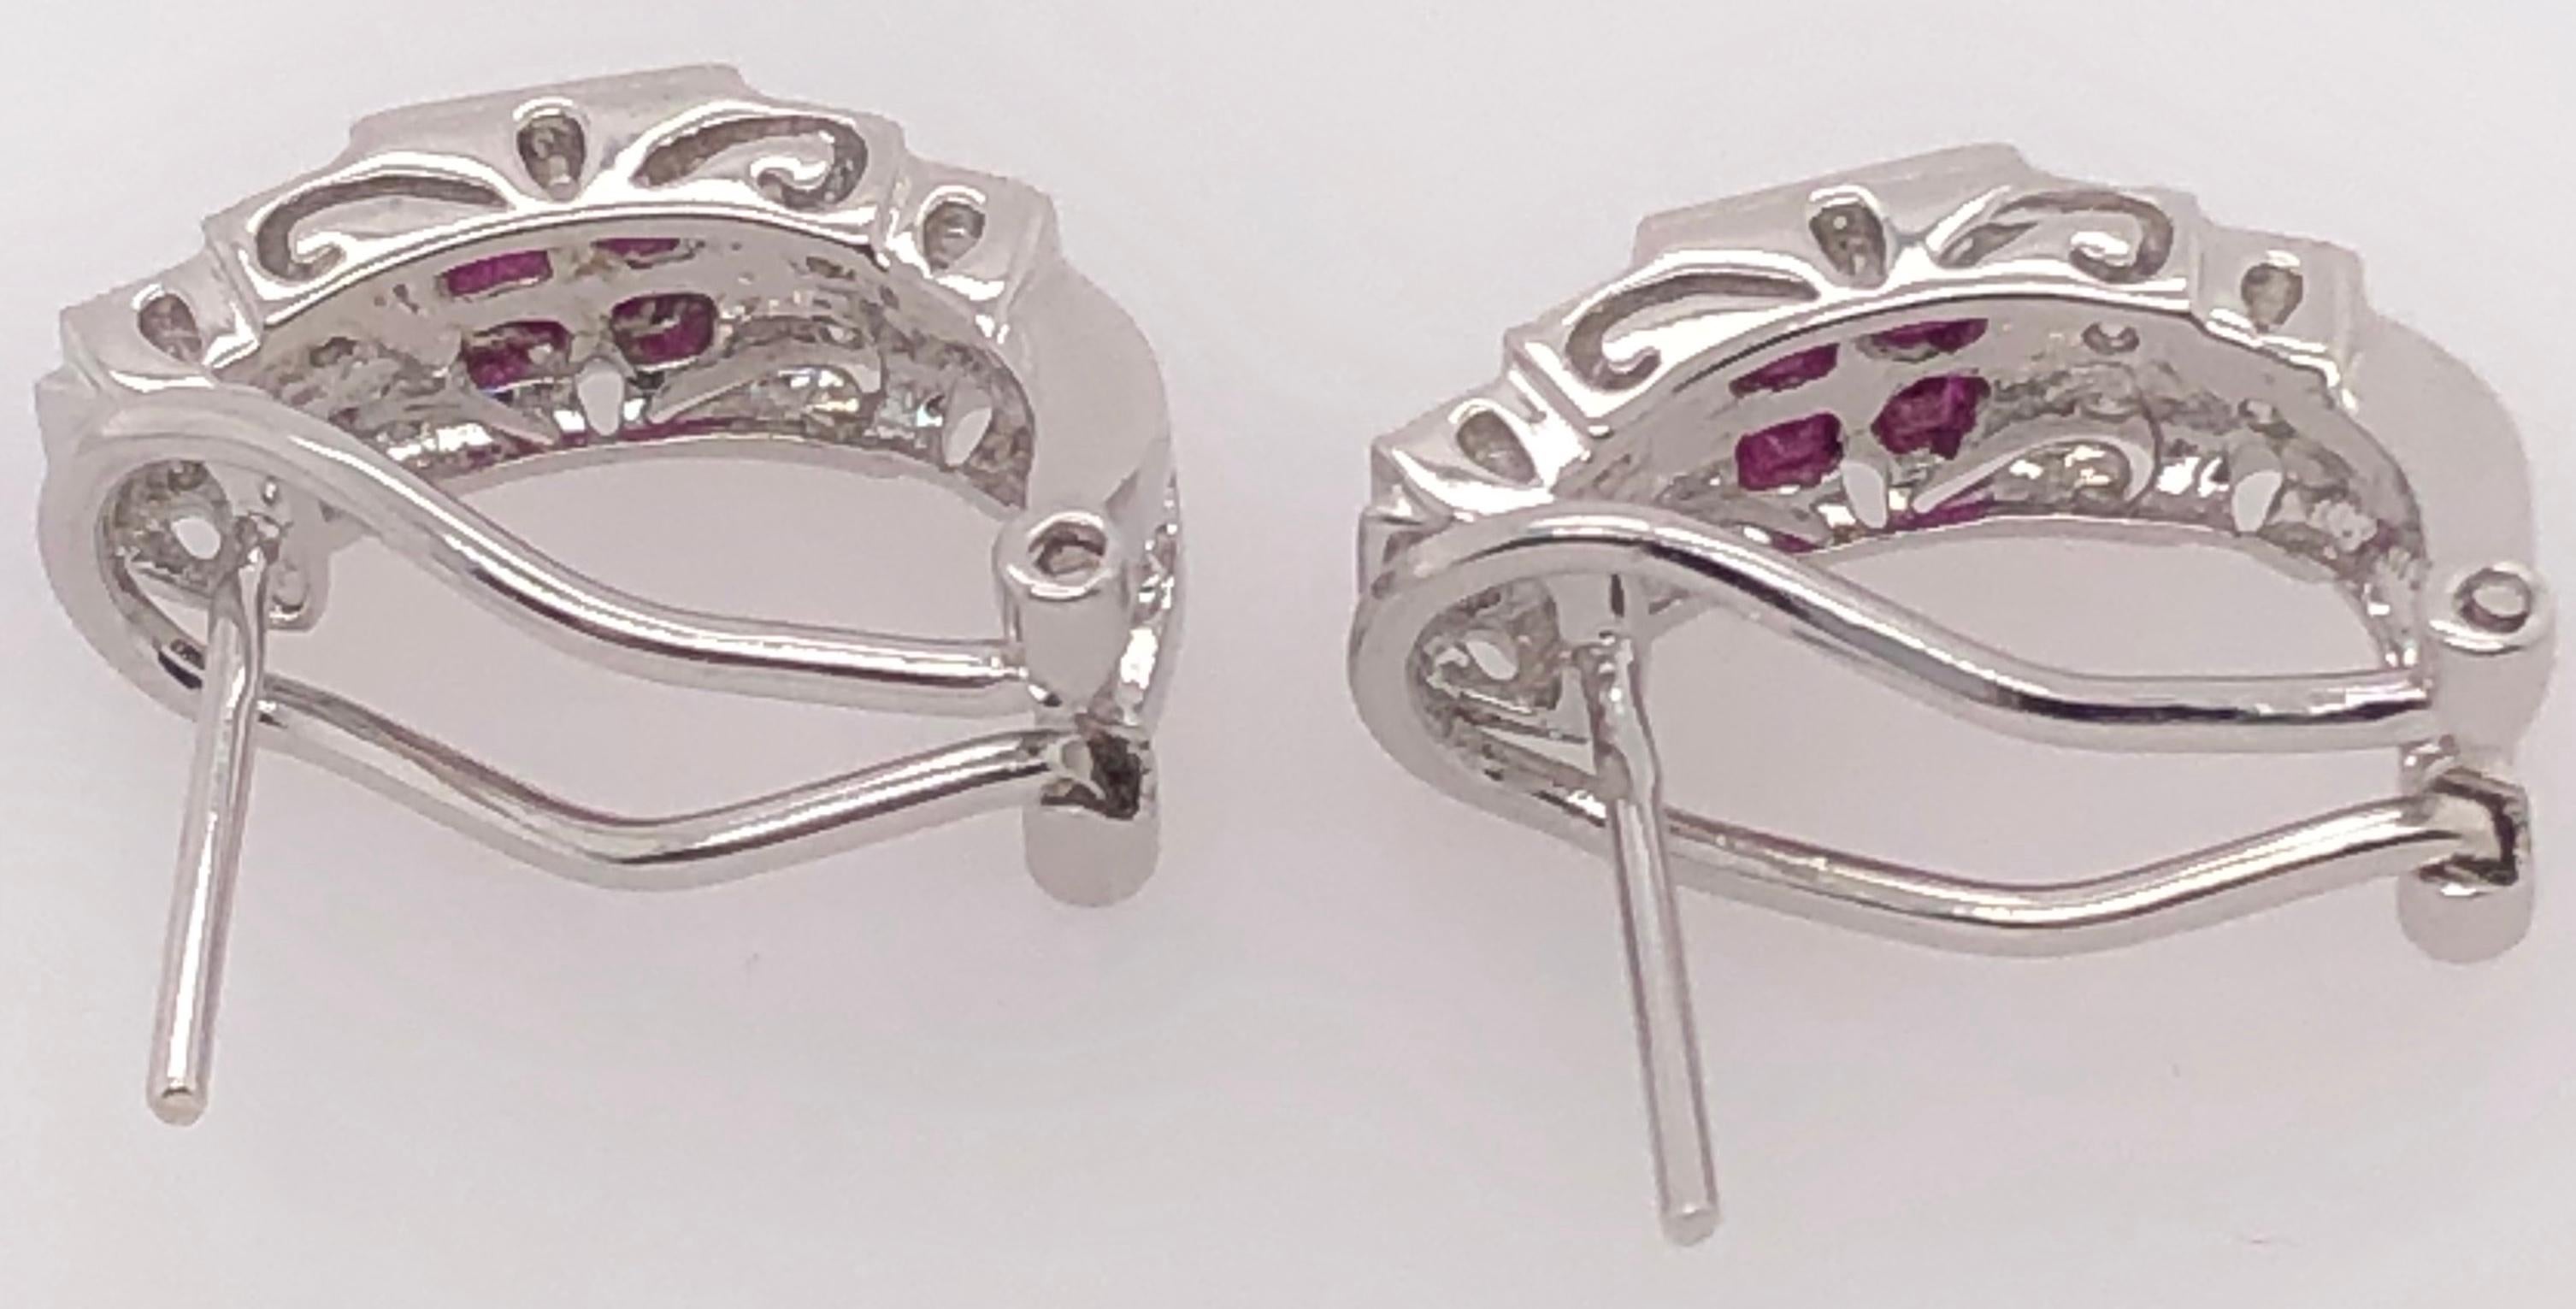 14 Karat White Gold French Back Half Hoop Ruby And Diamond Earrings
0.25 total diamond weight.
5.7 grams total weight.